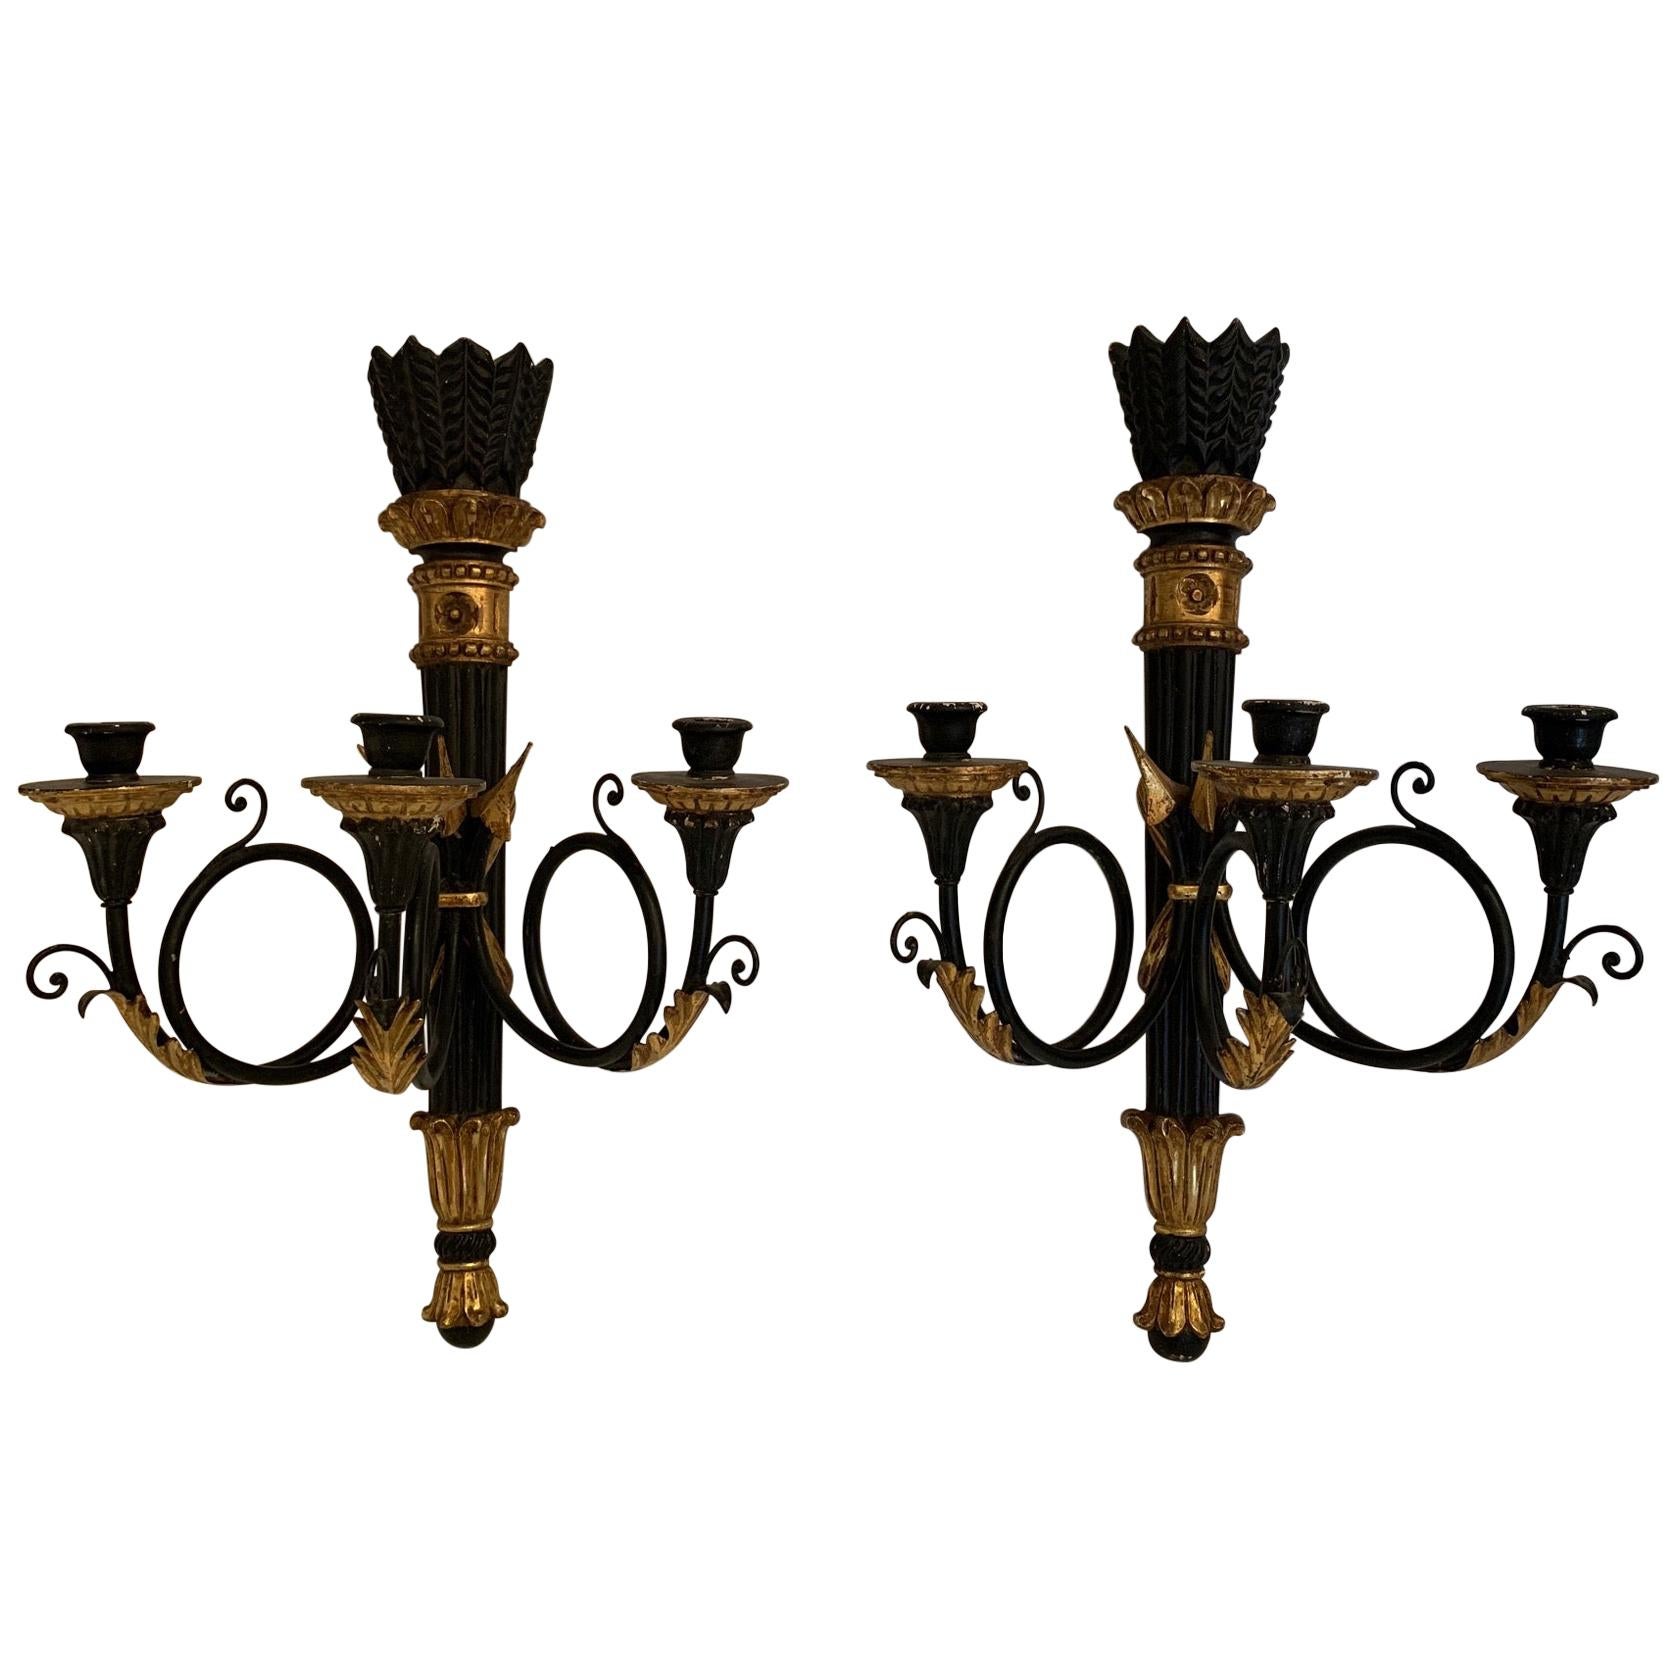 Stunning Pair of Italian Black and Gold Neoclassical Style Sconces